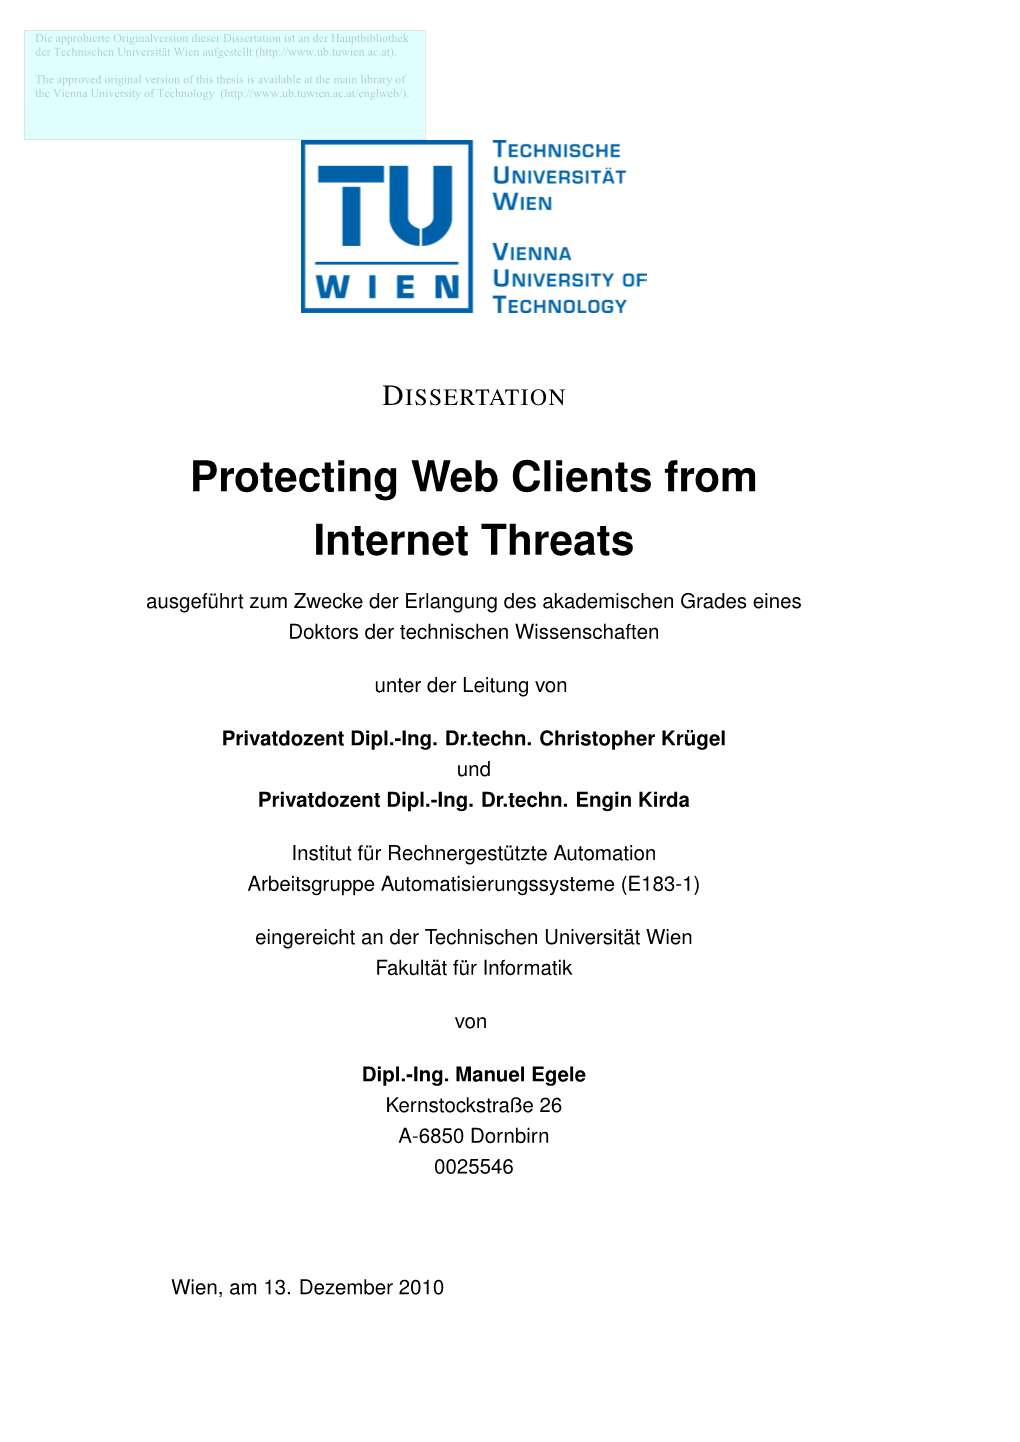 Protecting Web Clients from Internet Threats